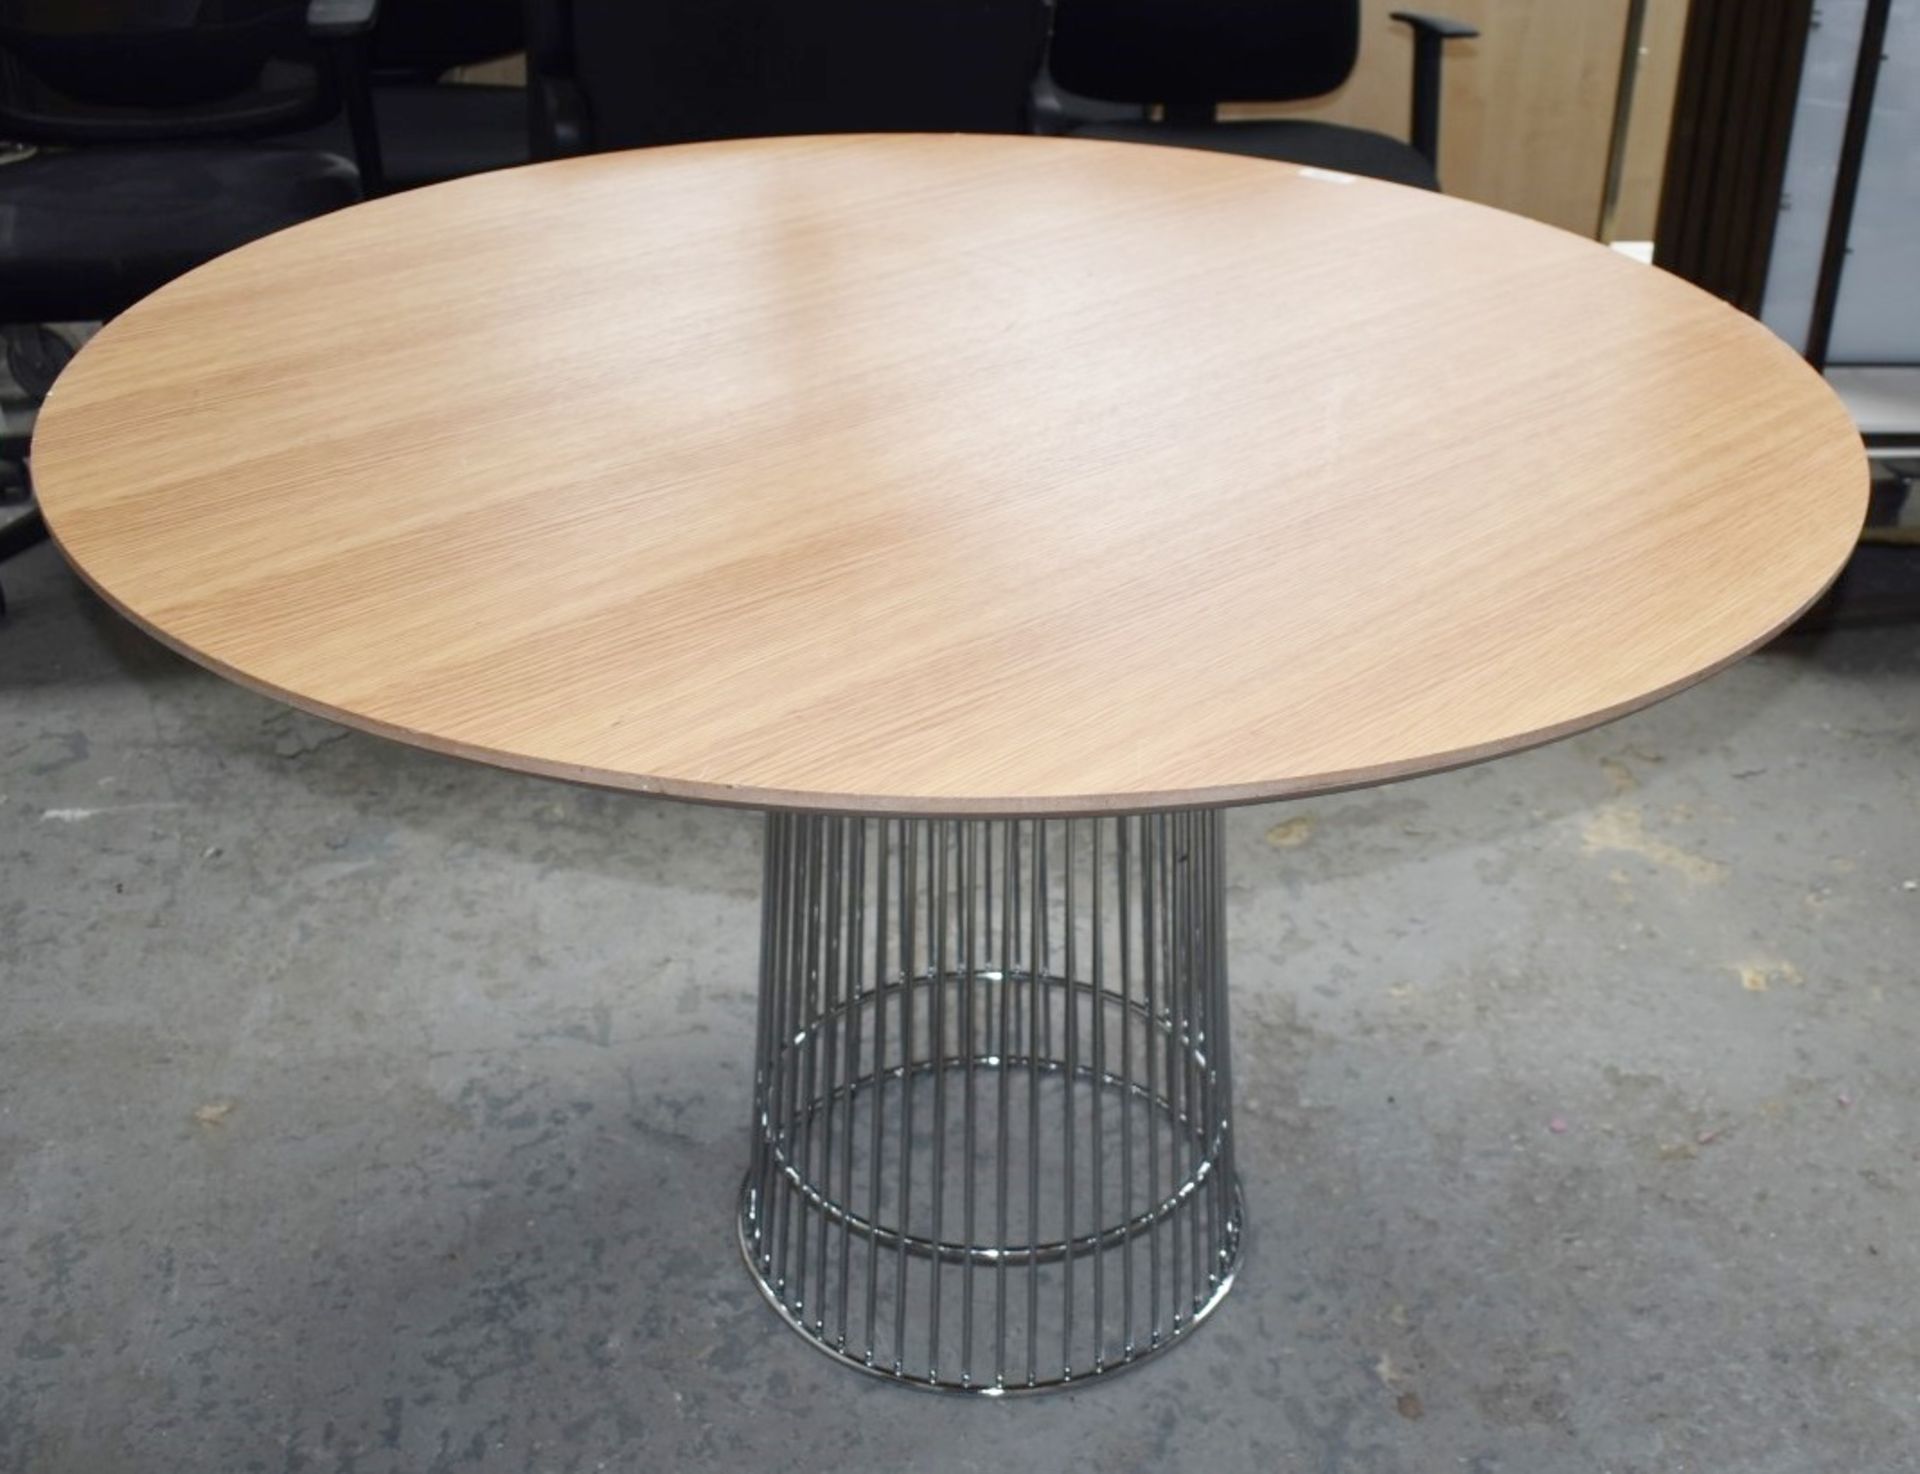 1 x Temahome Dining Table With a Large Round Table Top and Stylish Chrome Base - 150cm Diameter - Image 8 of 13